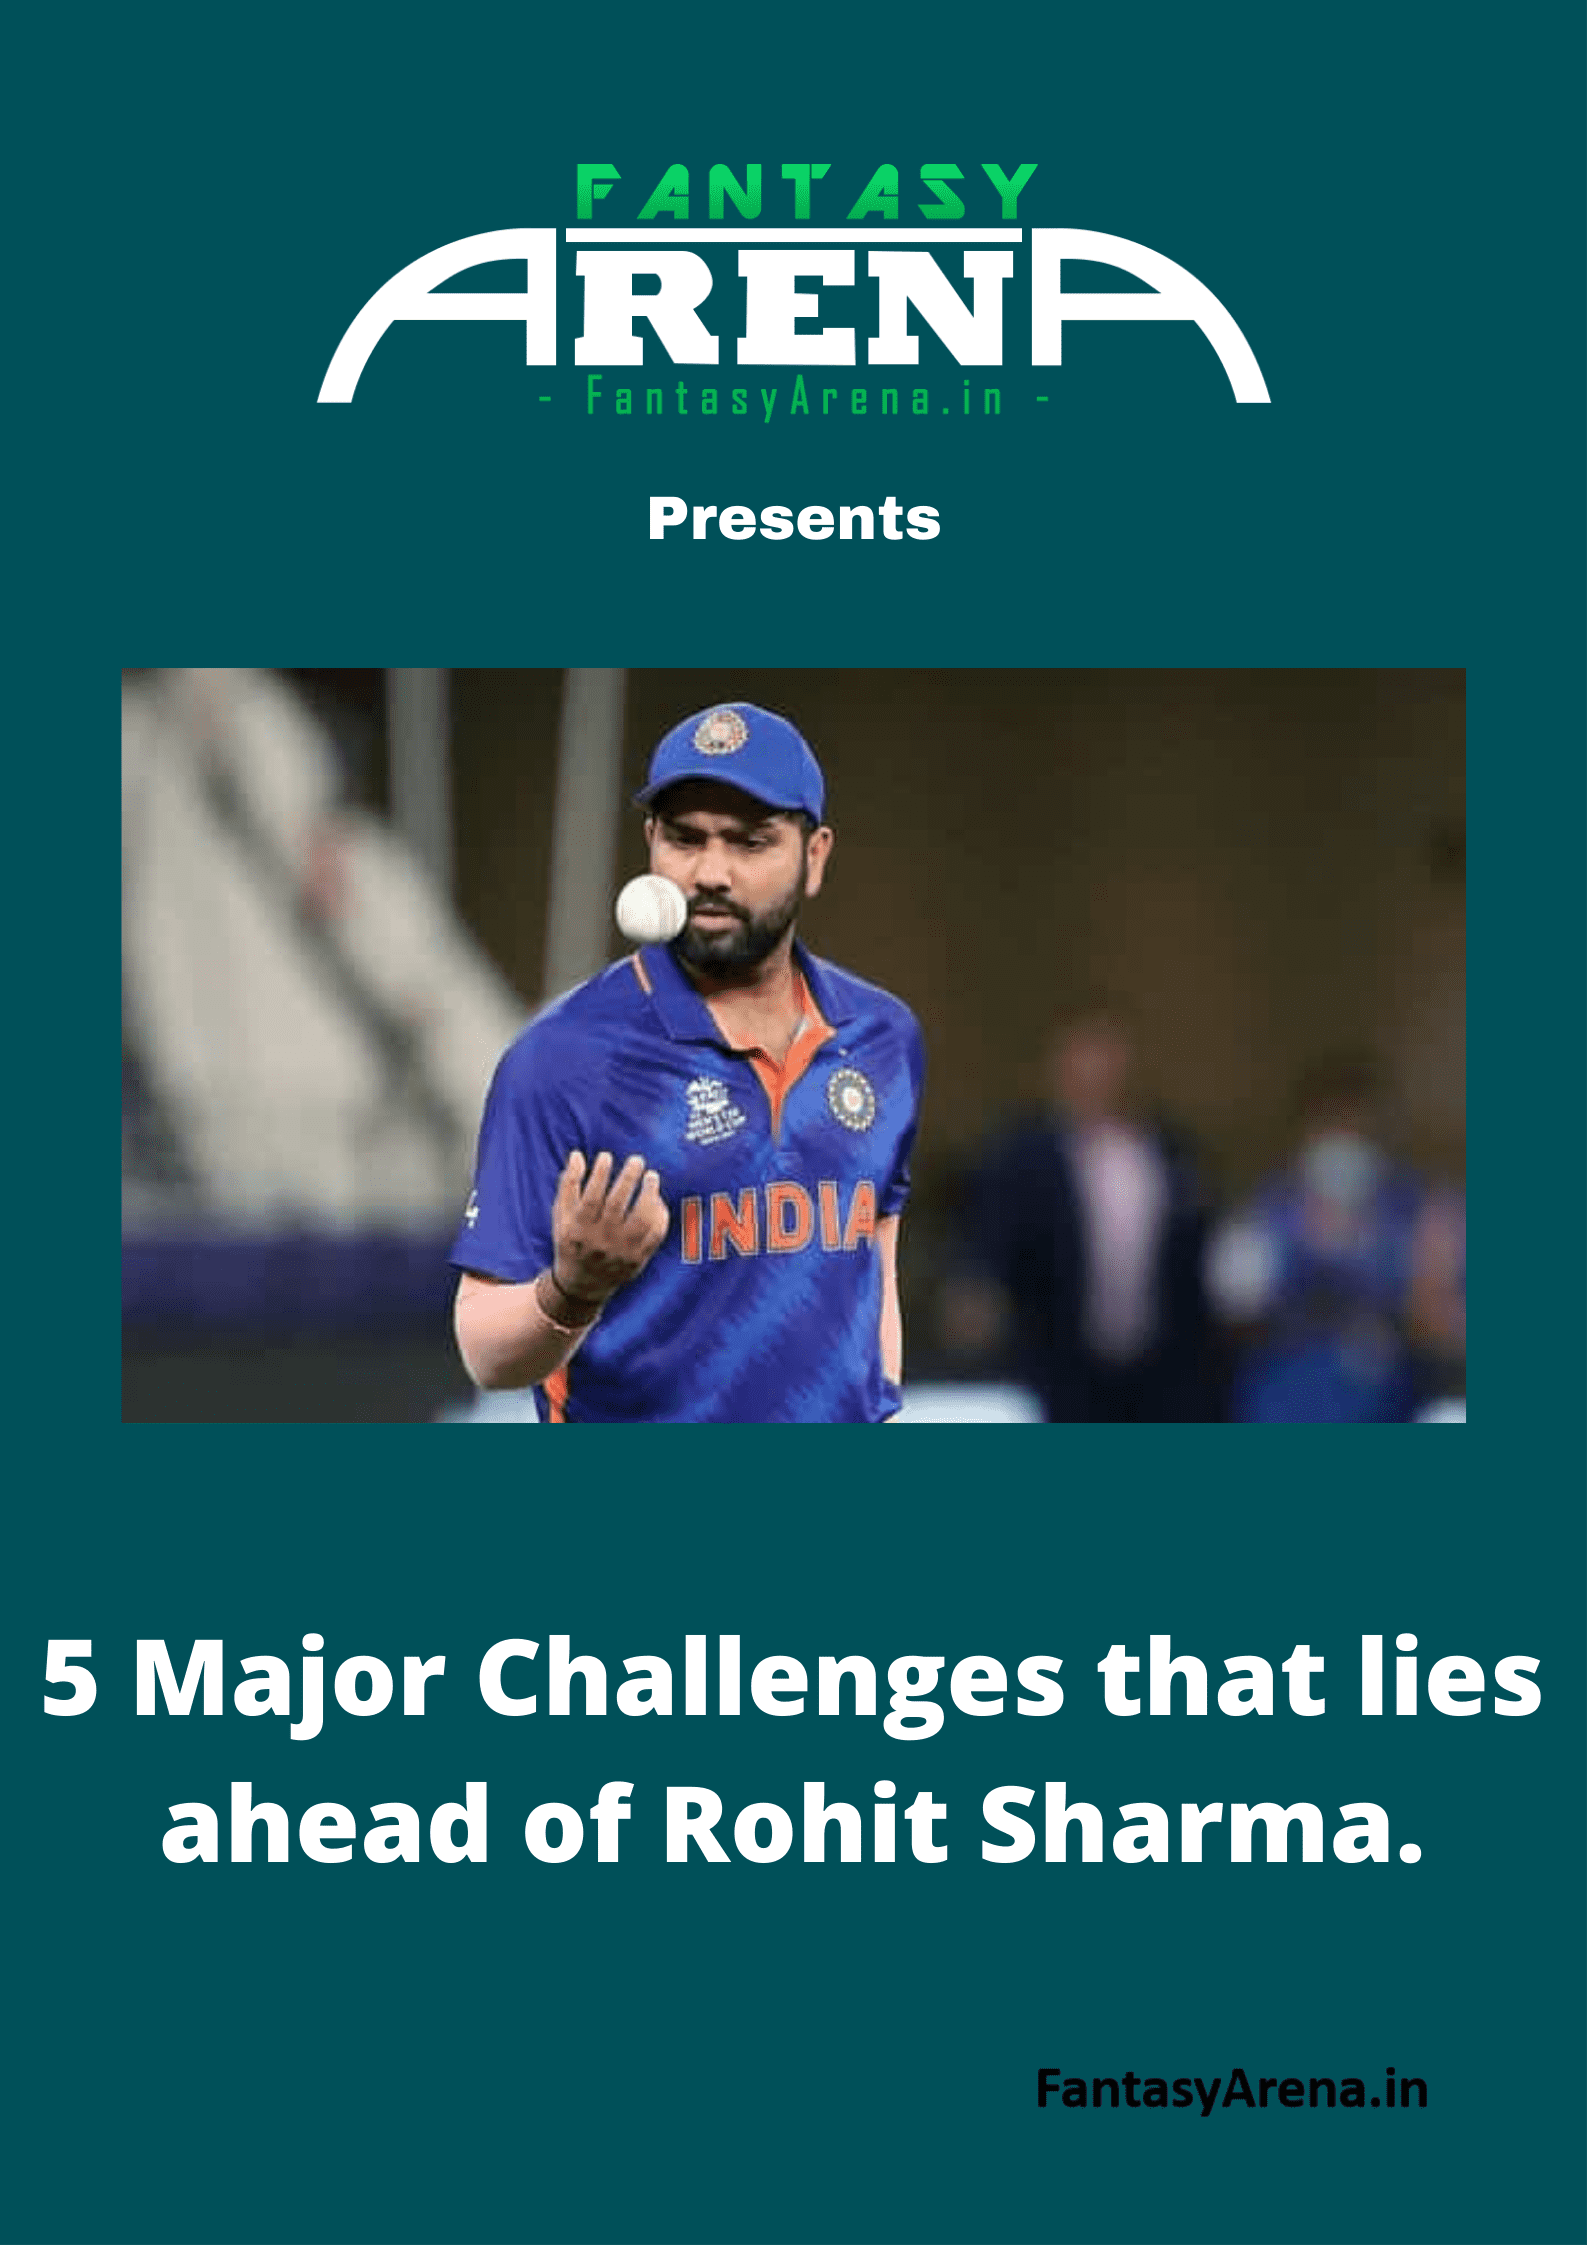 Rohit Sharma.: 5 Major Challenges that lies ahead of India's New T20 Skipper.